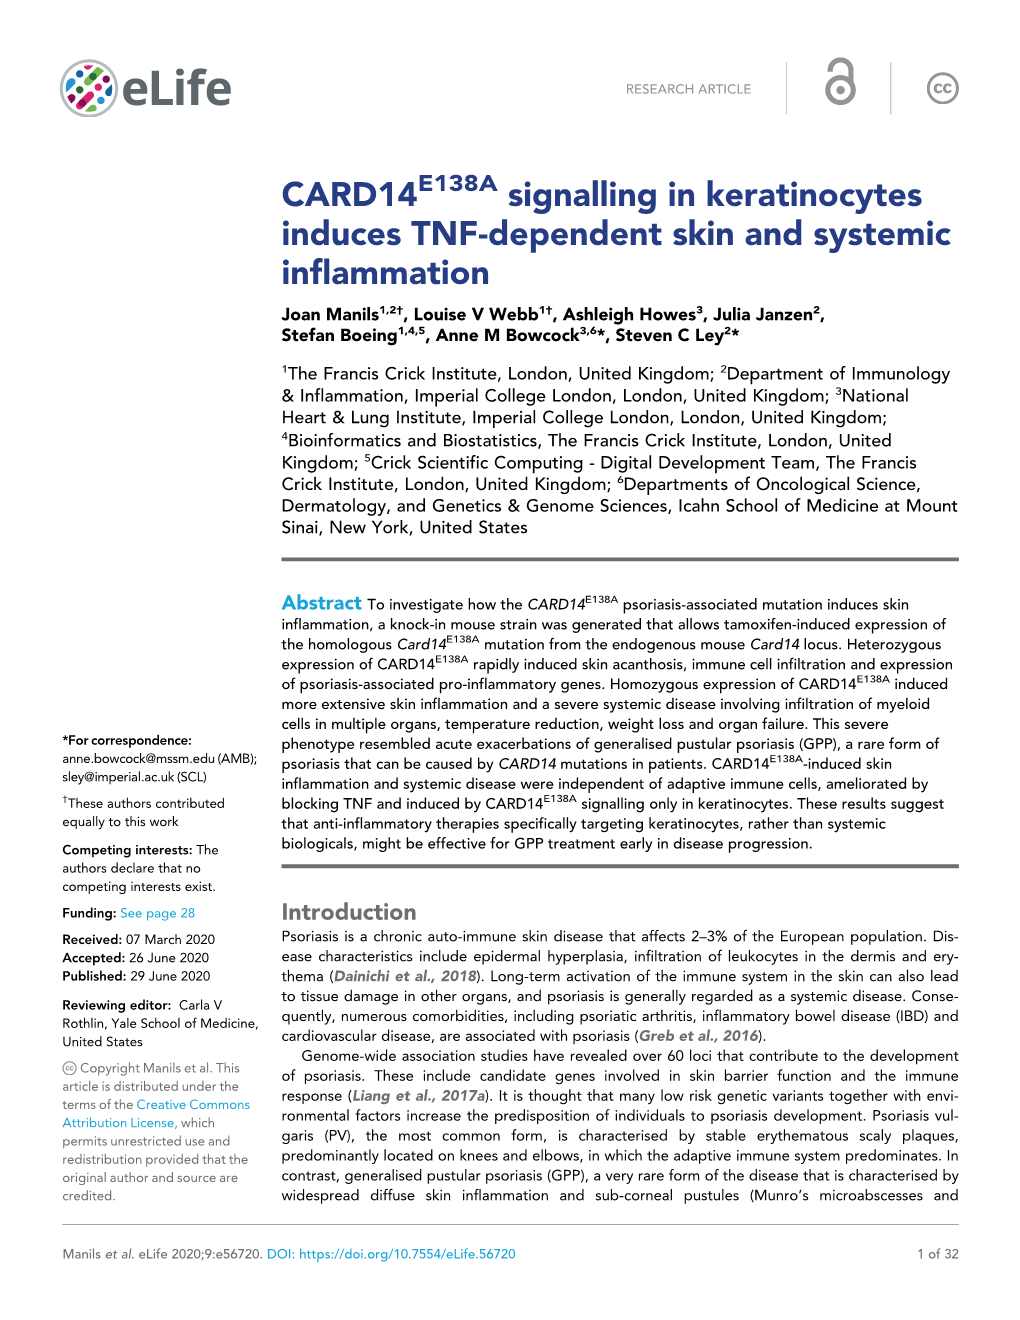 CARD14 Signalling in Keratinocytes Induces TNF-Dependent Skin And